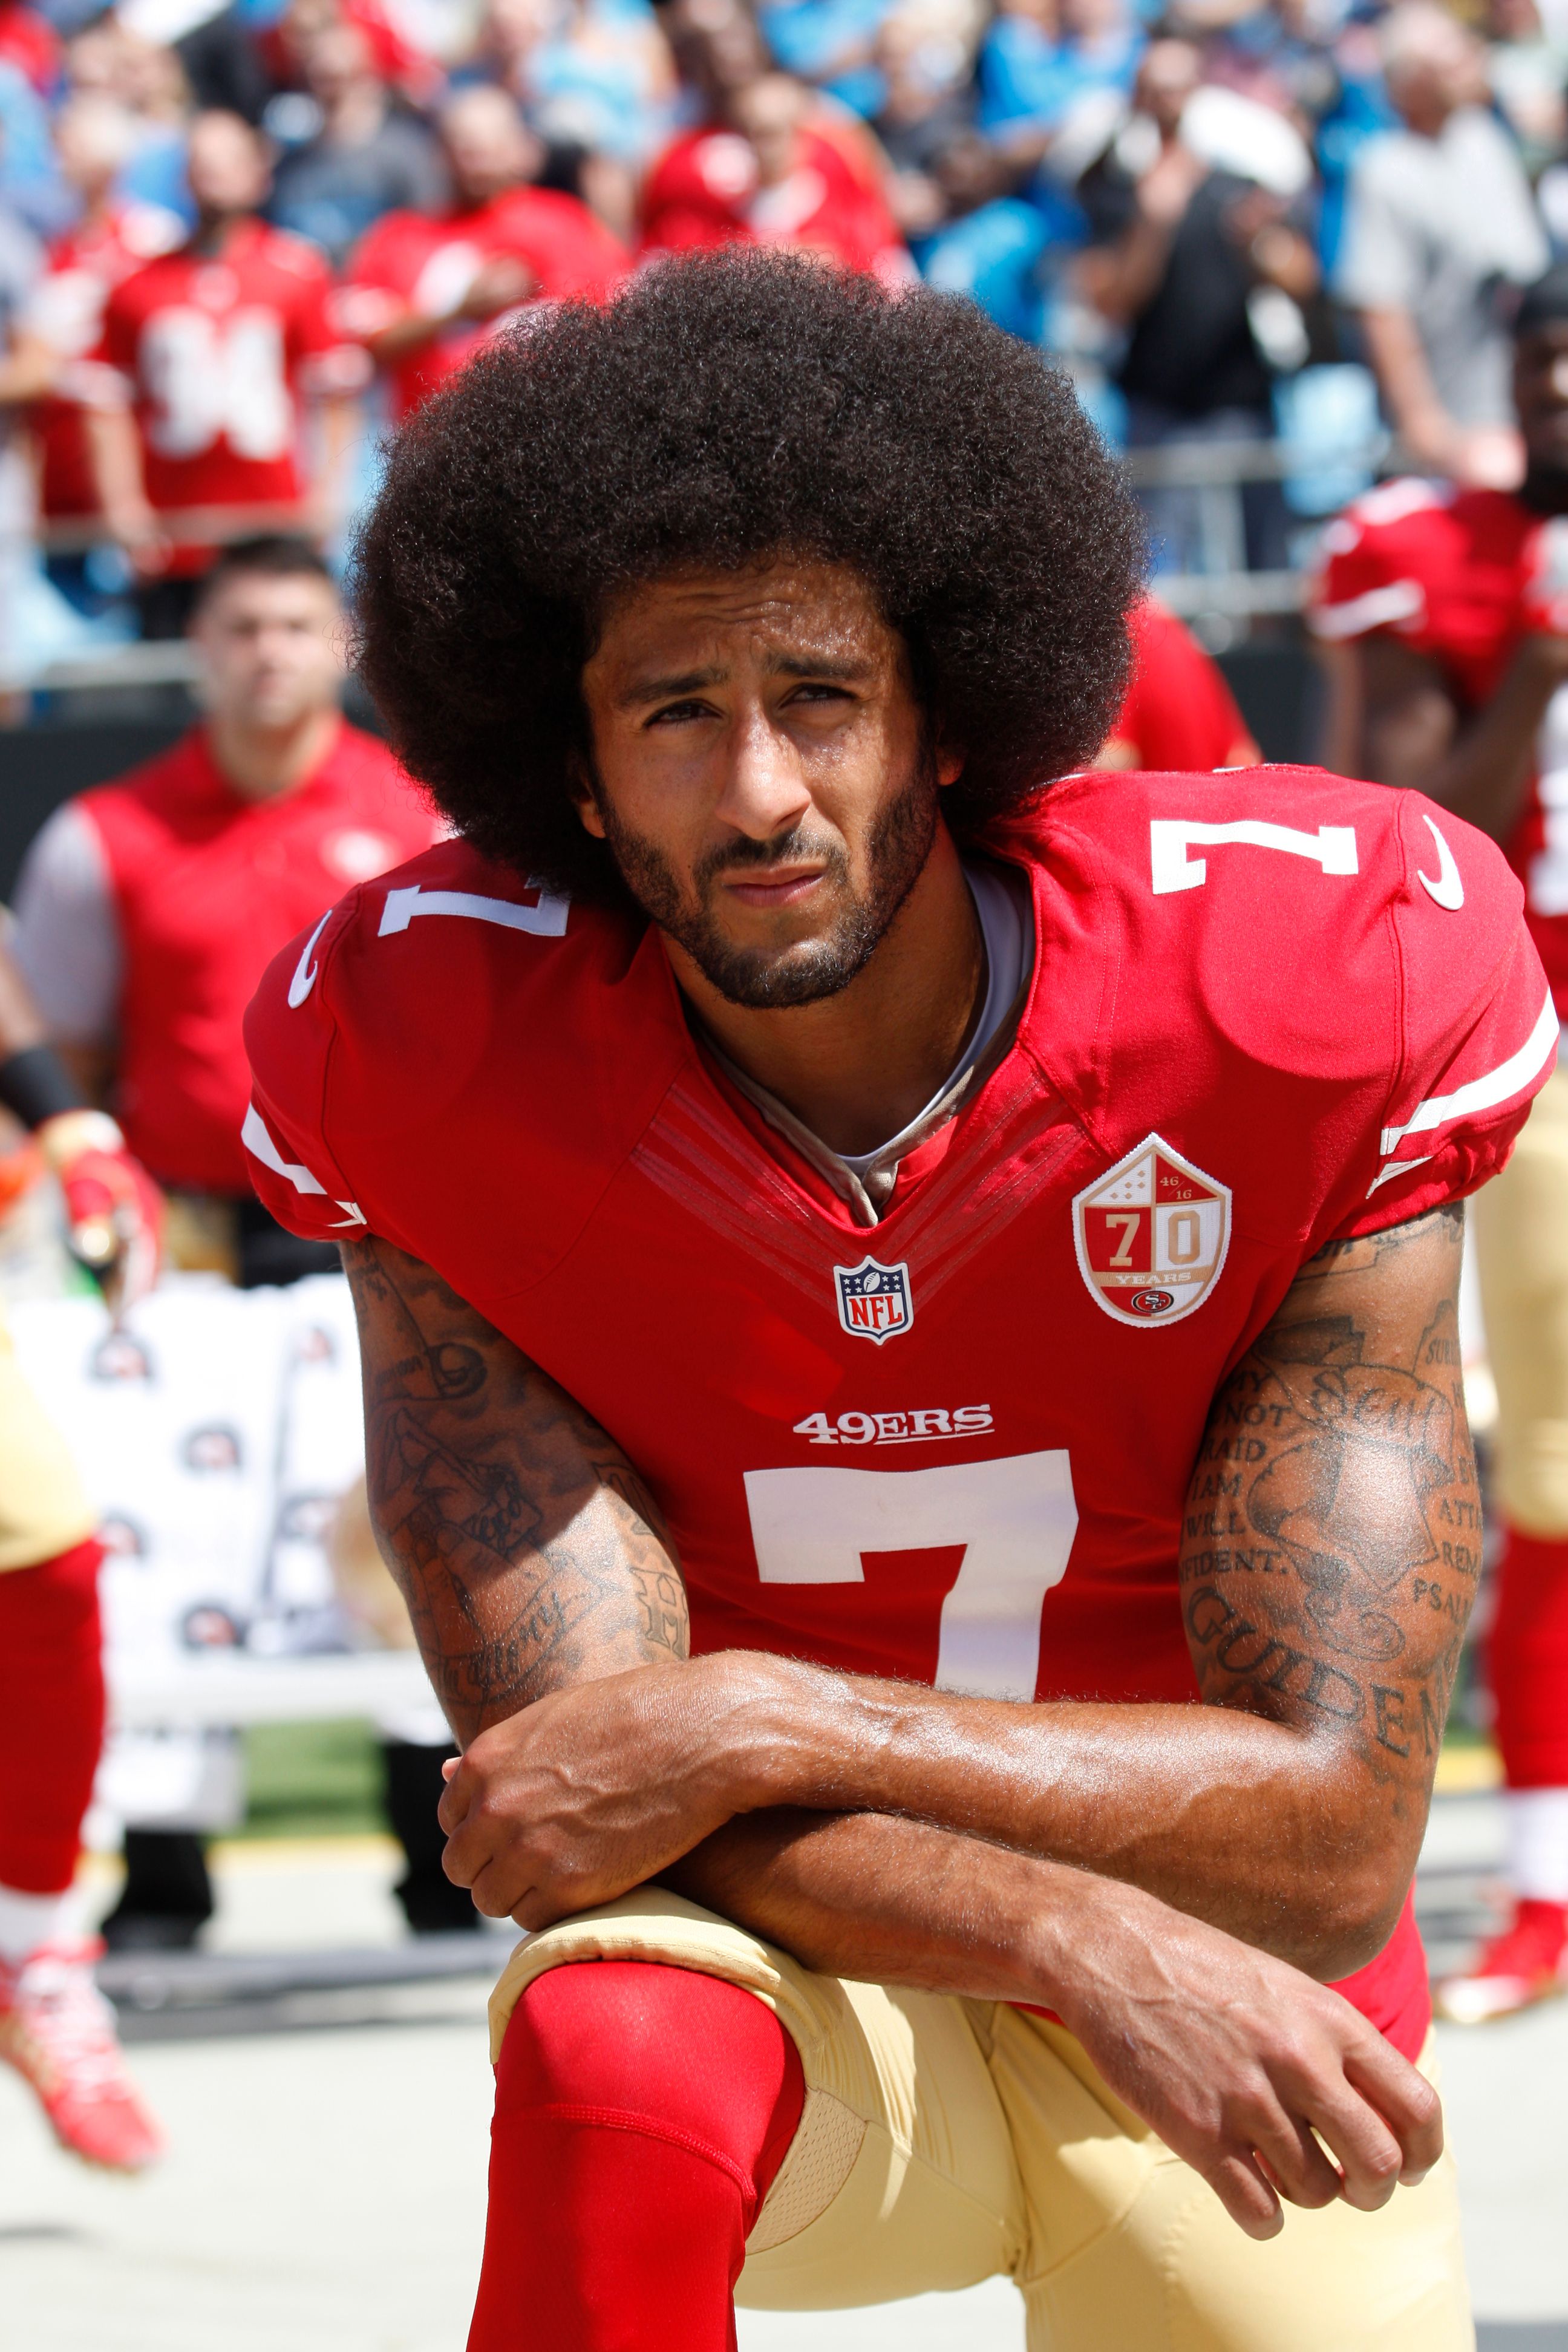 Colin Kaepernick kneels at a San Francisco 49ers game | Source: Getty Images